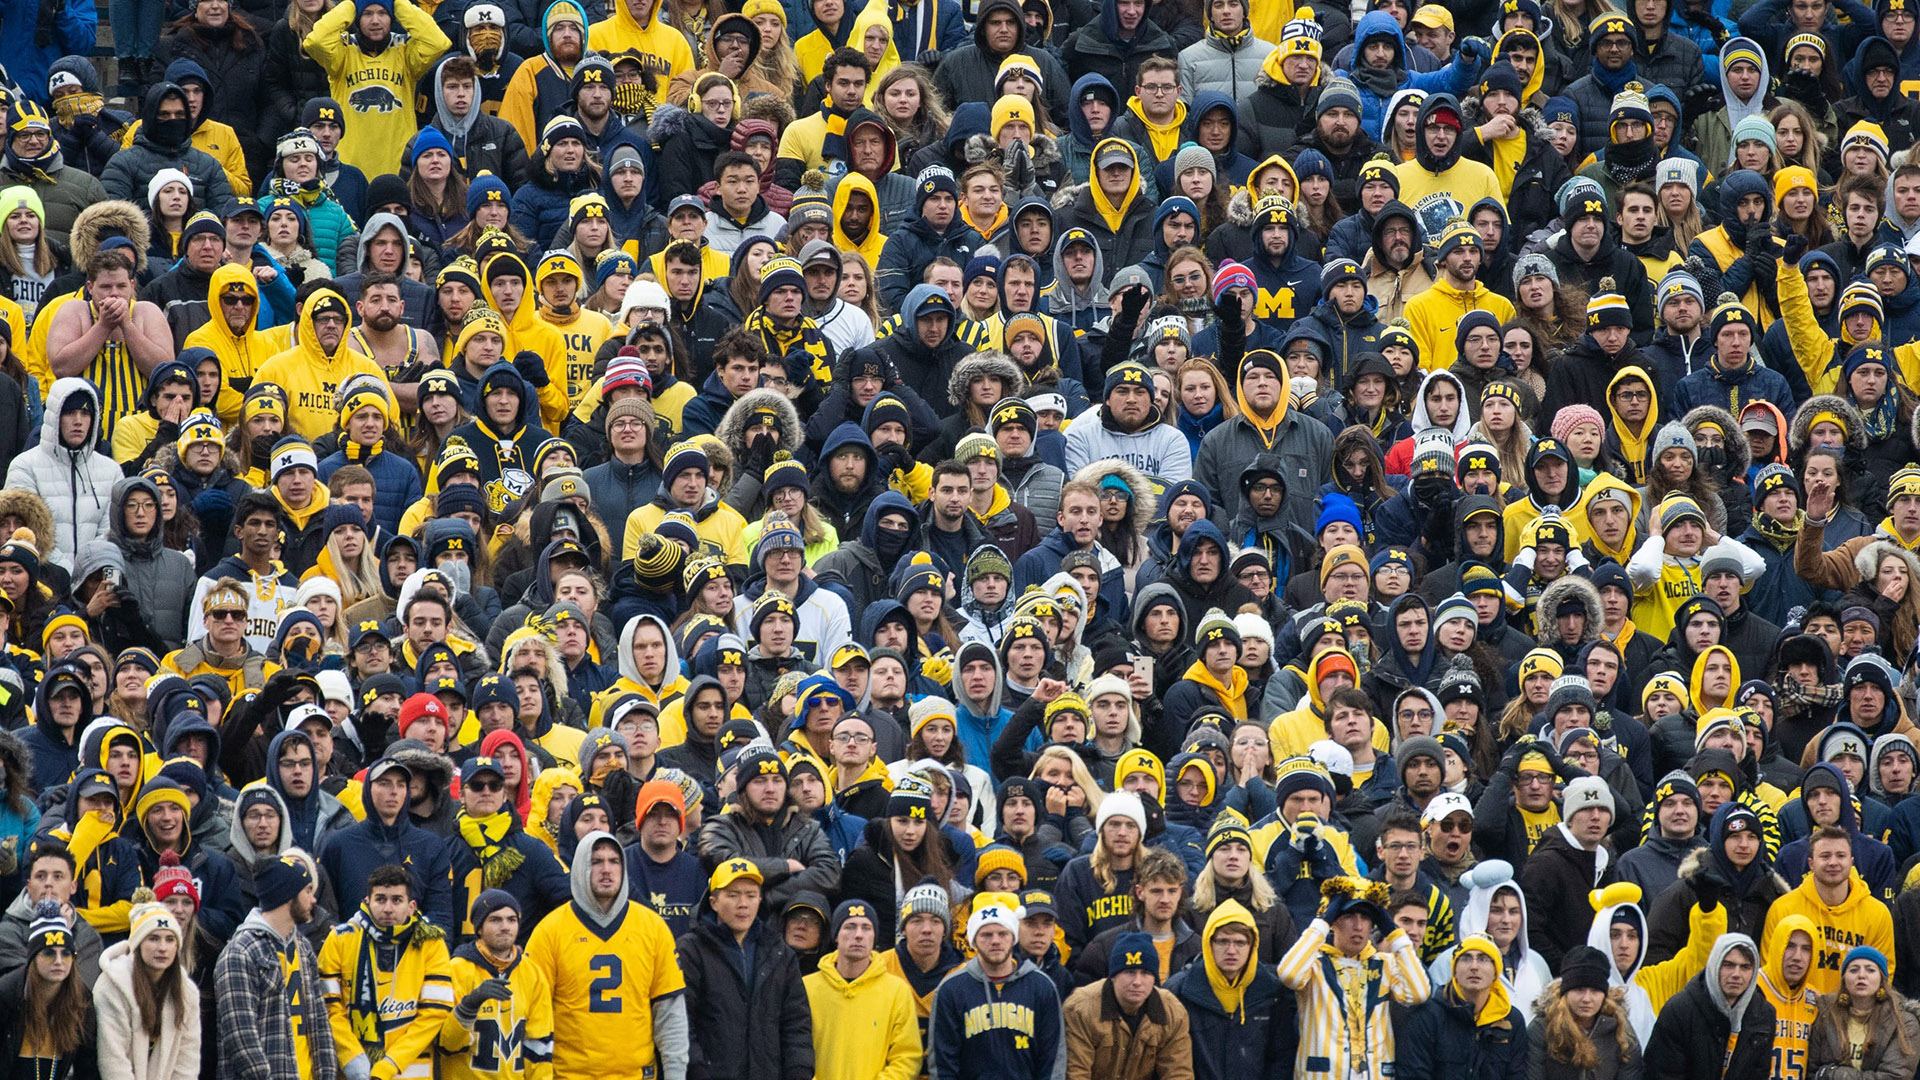 Football’s economic impact on college towns, players and NFL